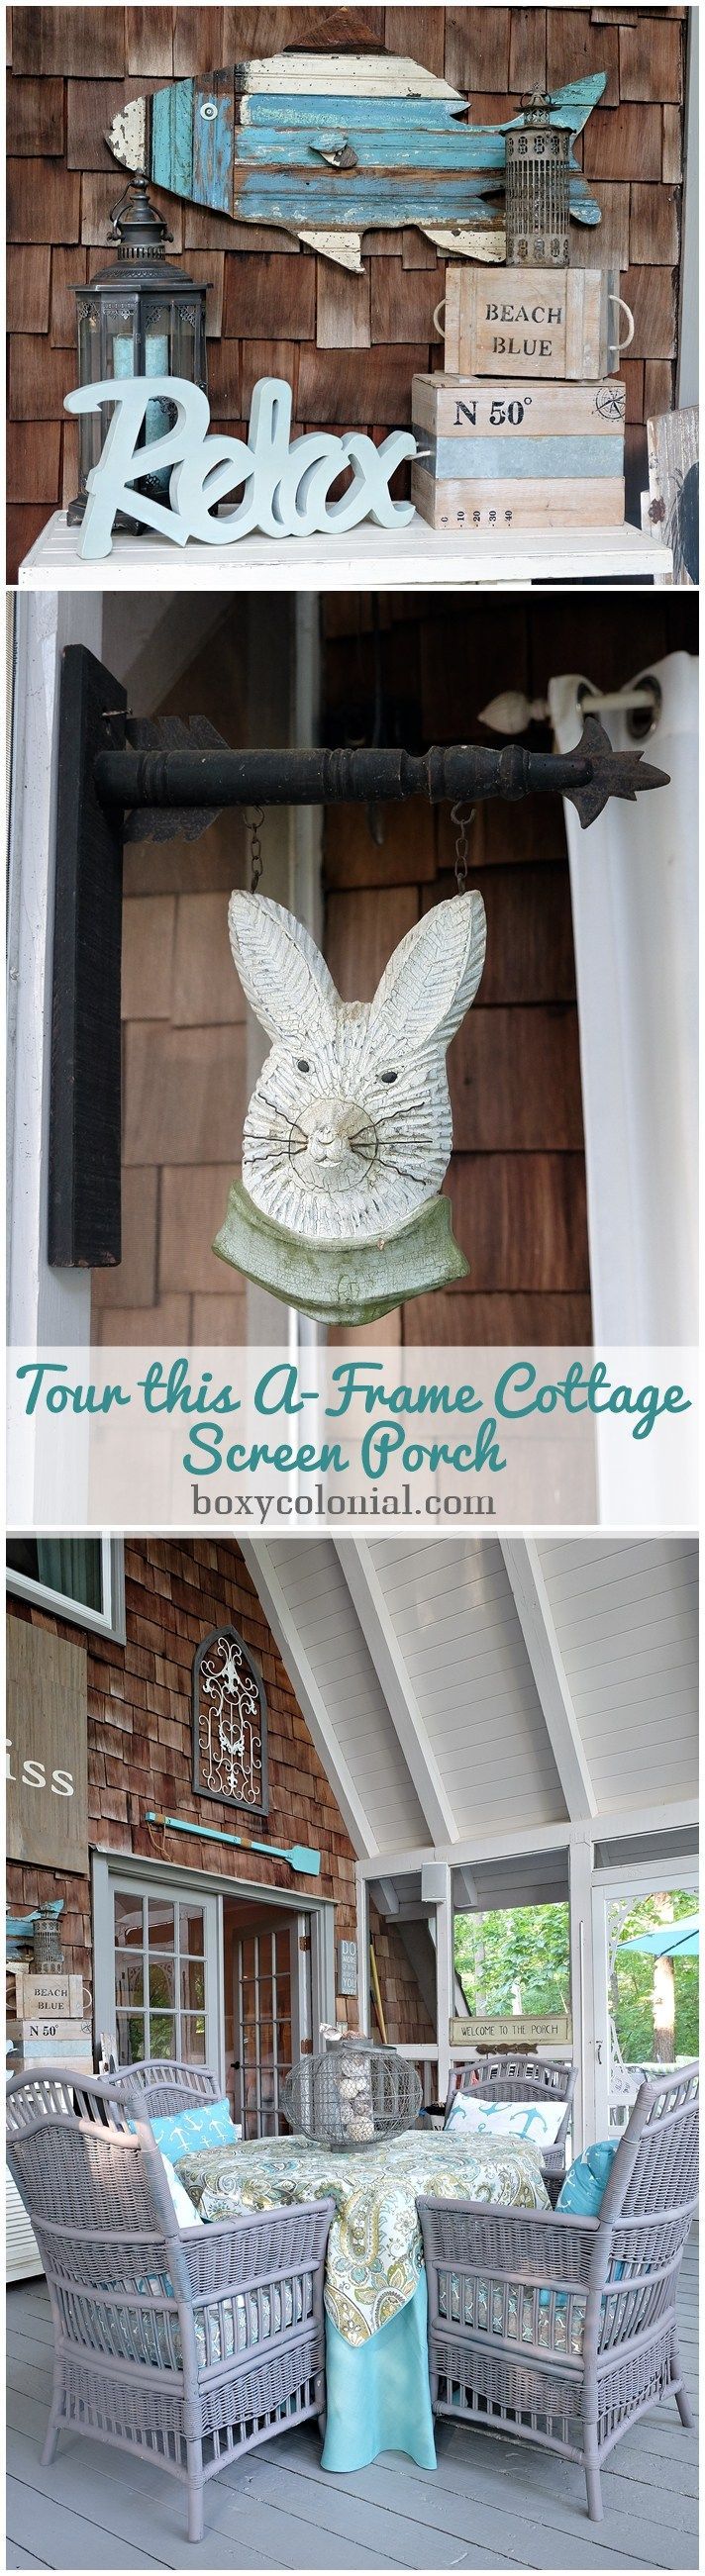 My Mom's A-frame House Tour, Part 3: The Screen Porch -